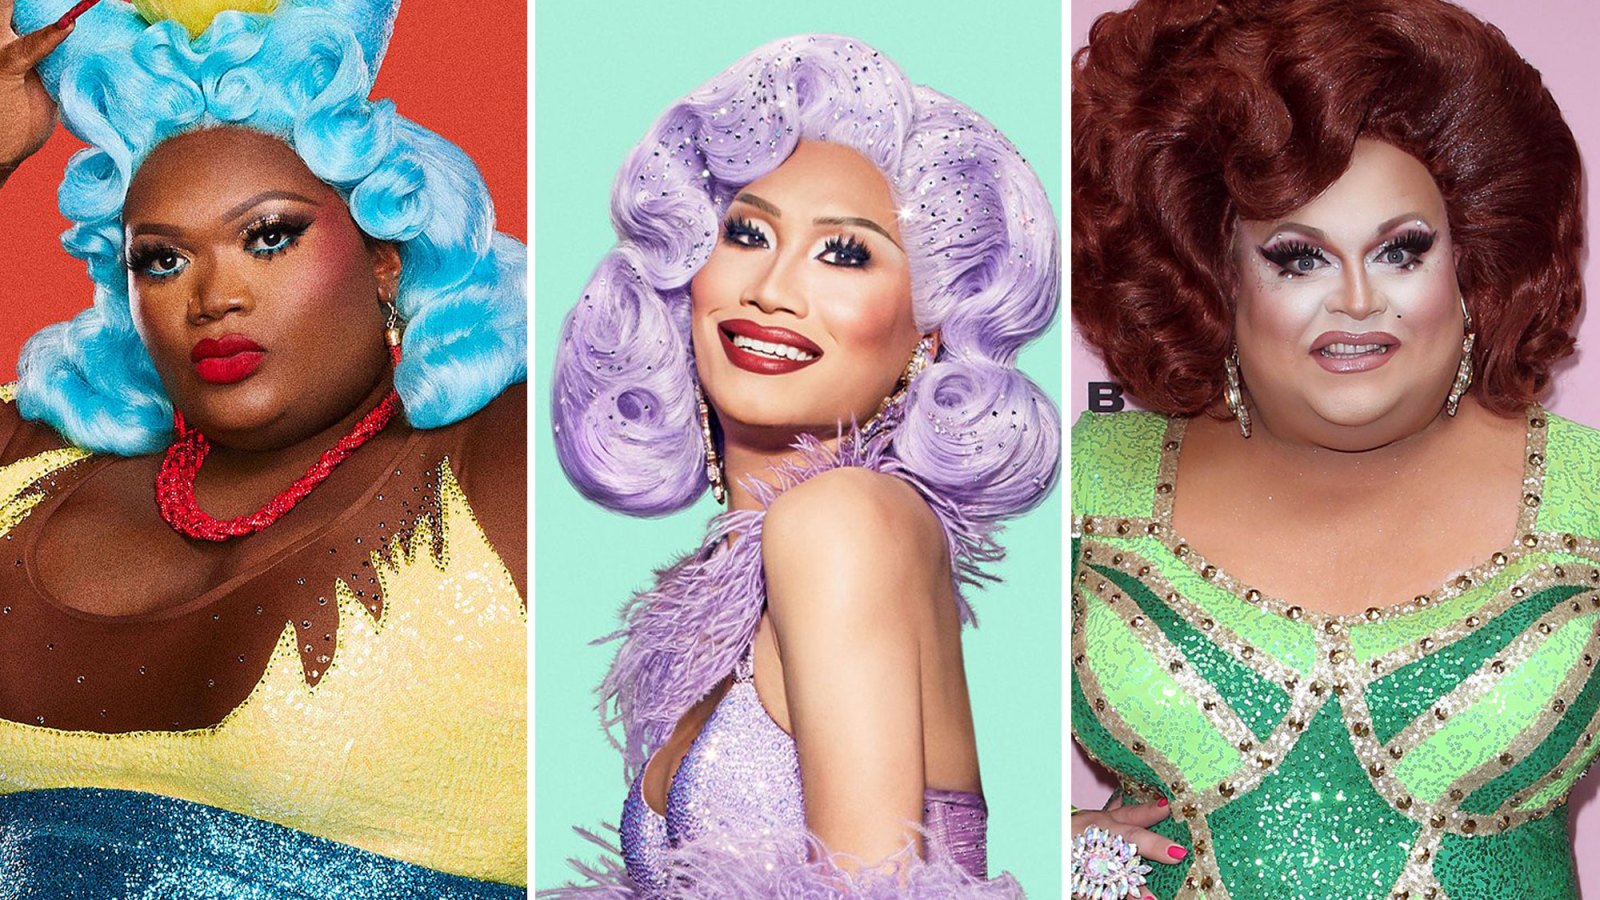 Kornbread Jete and Kahmora Hall Joining Ginger Minj as Drag Queen Versions of the Sanderson Sisters in Hocus Pocus 2